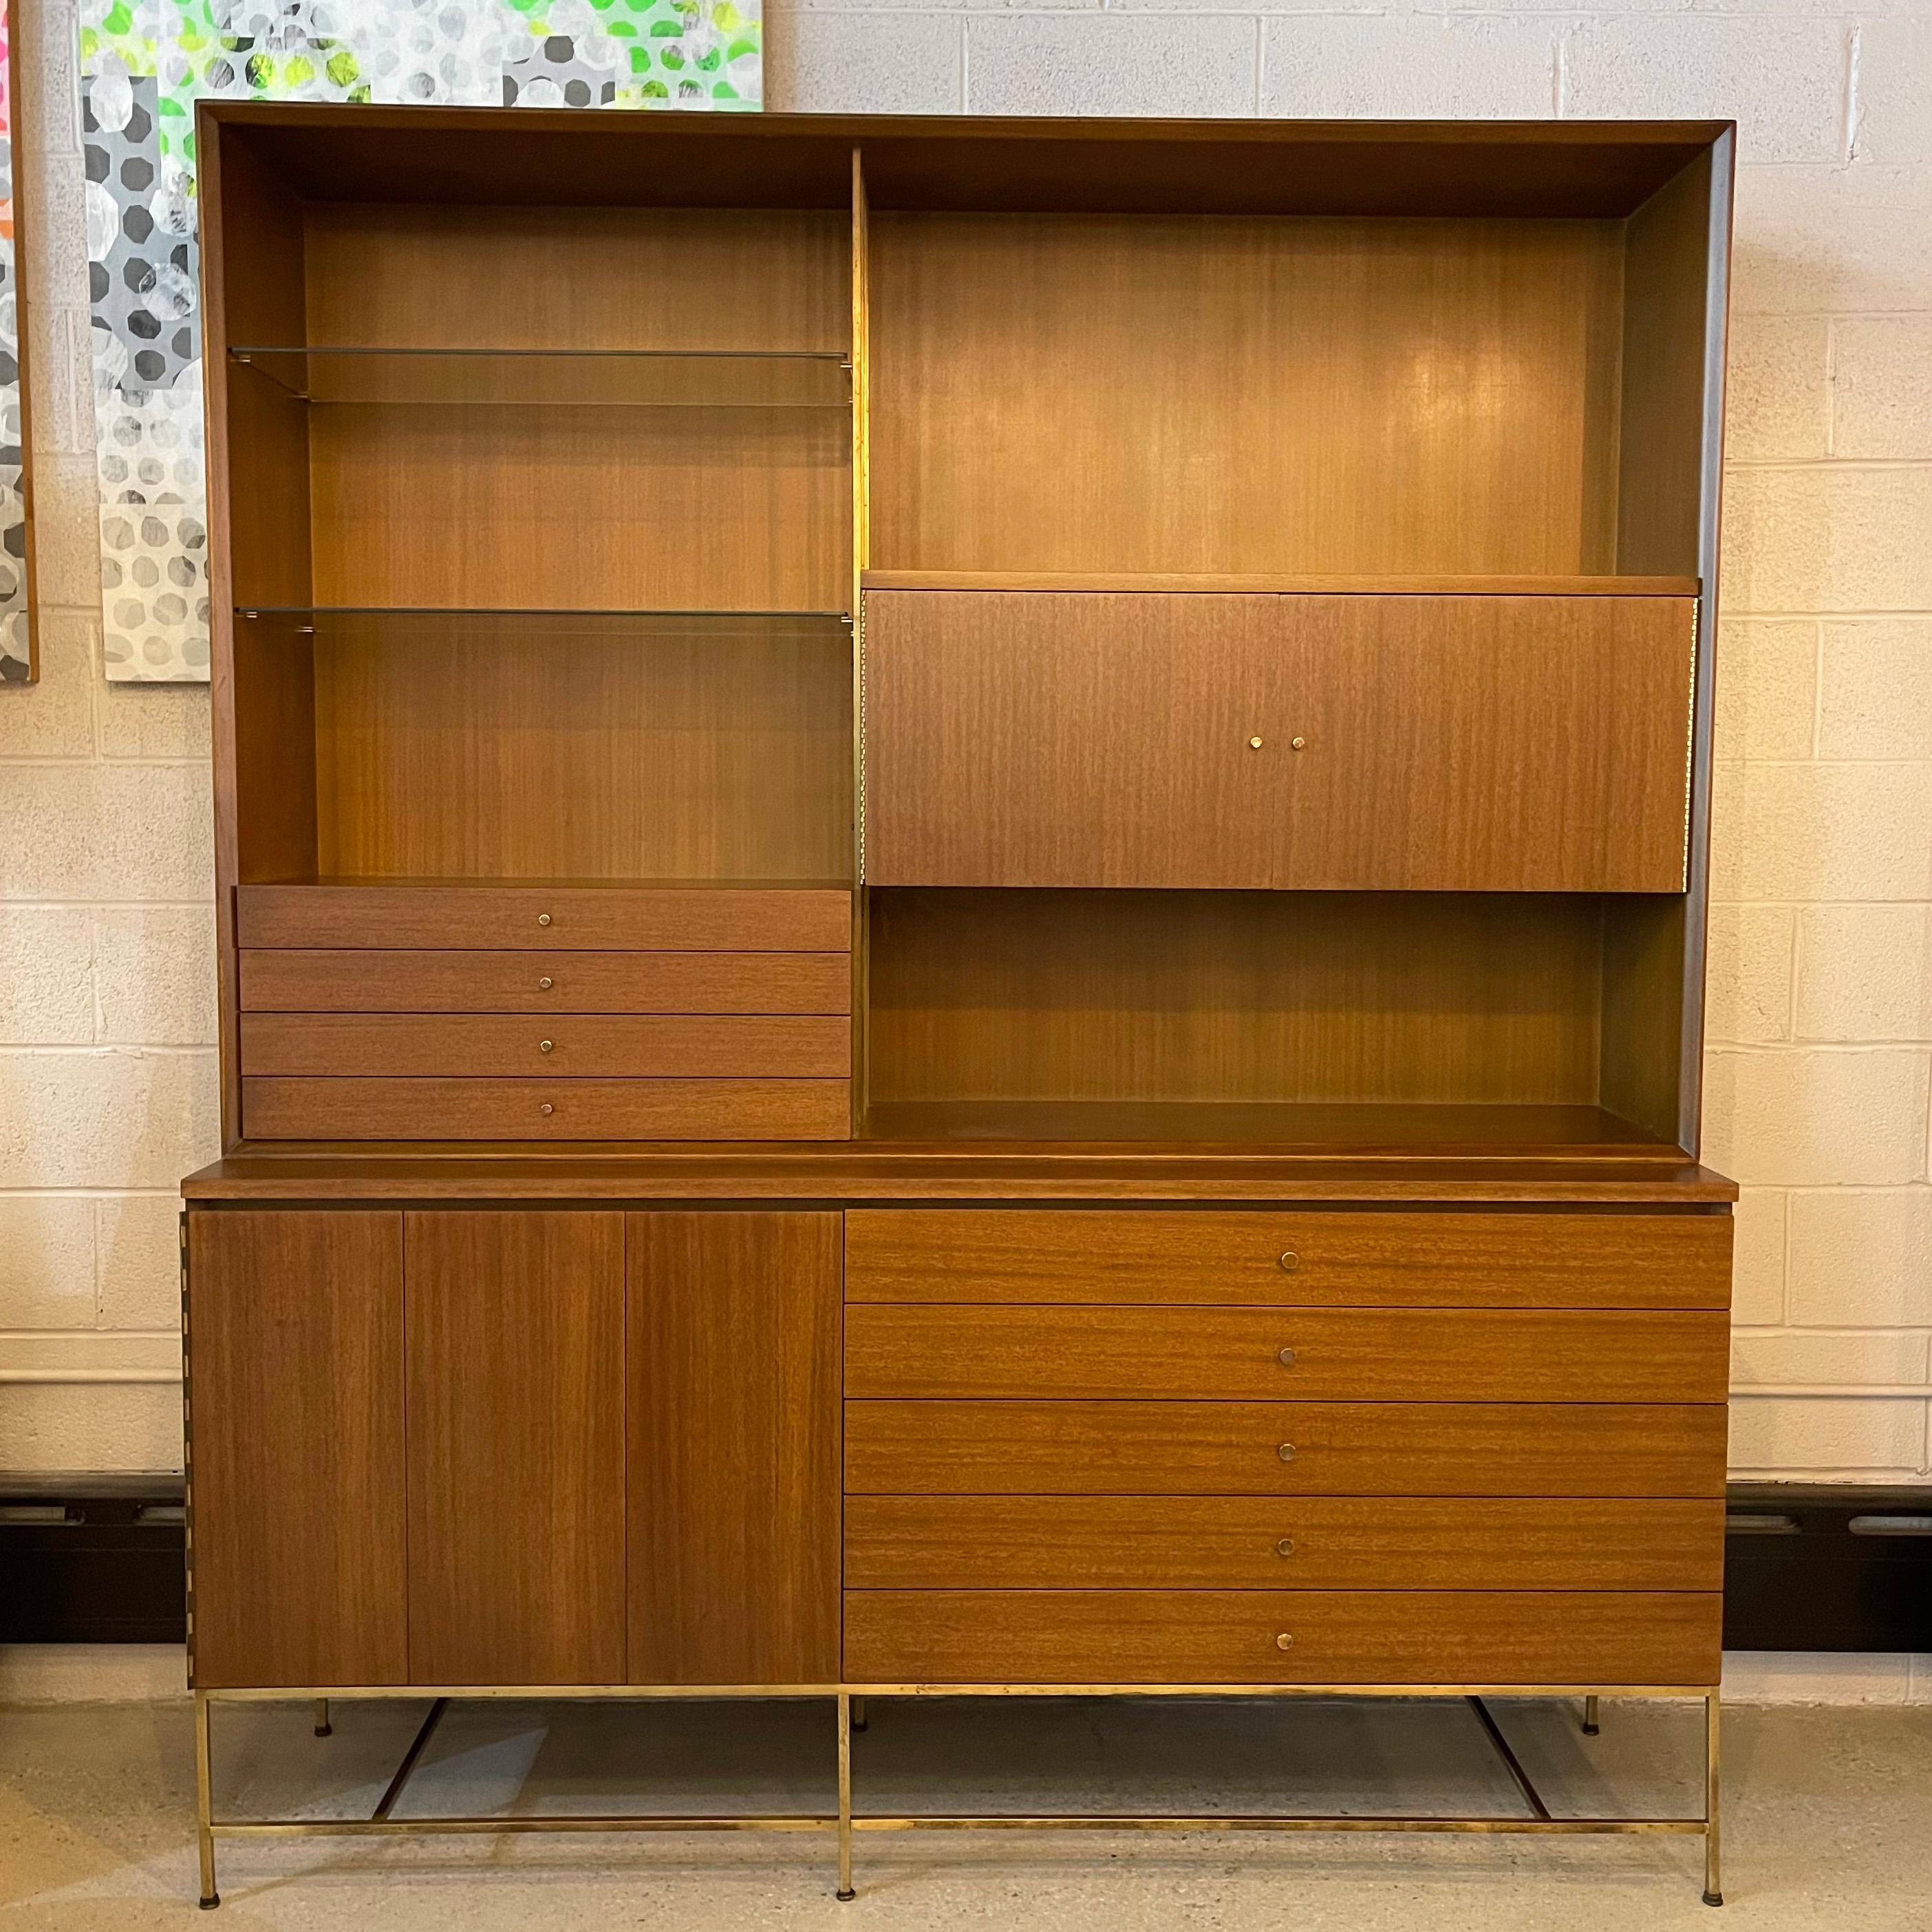 Mid-Century Modern, two piece, walnut and brass, wall unit hutch credenza by Paul McCobb for Calvin Furniture, Irwin Collection features a bottom credenza with recessed wall unit hutch on top. There are brass accents throughout; base, rails and